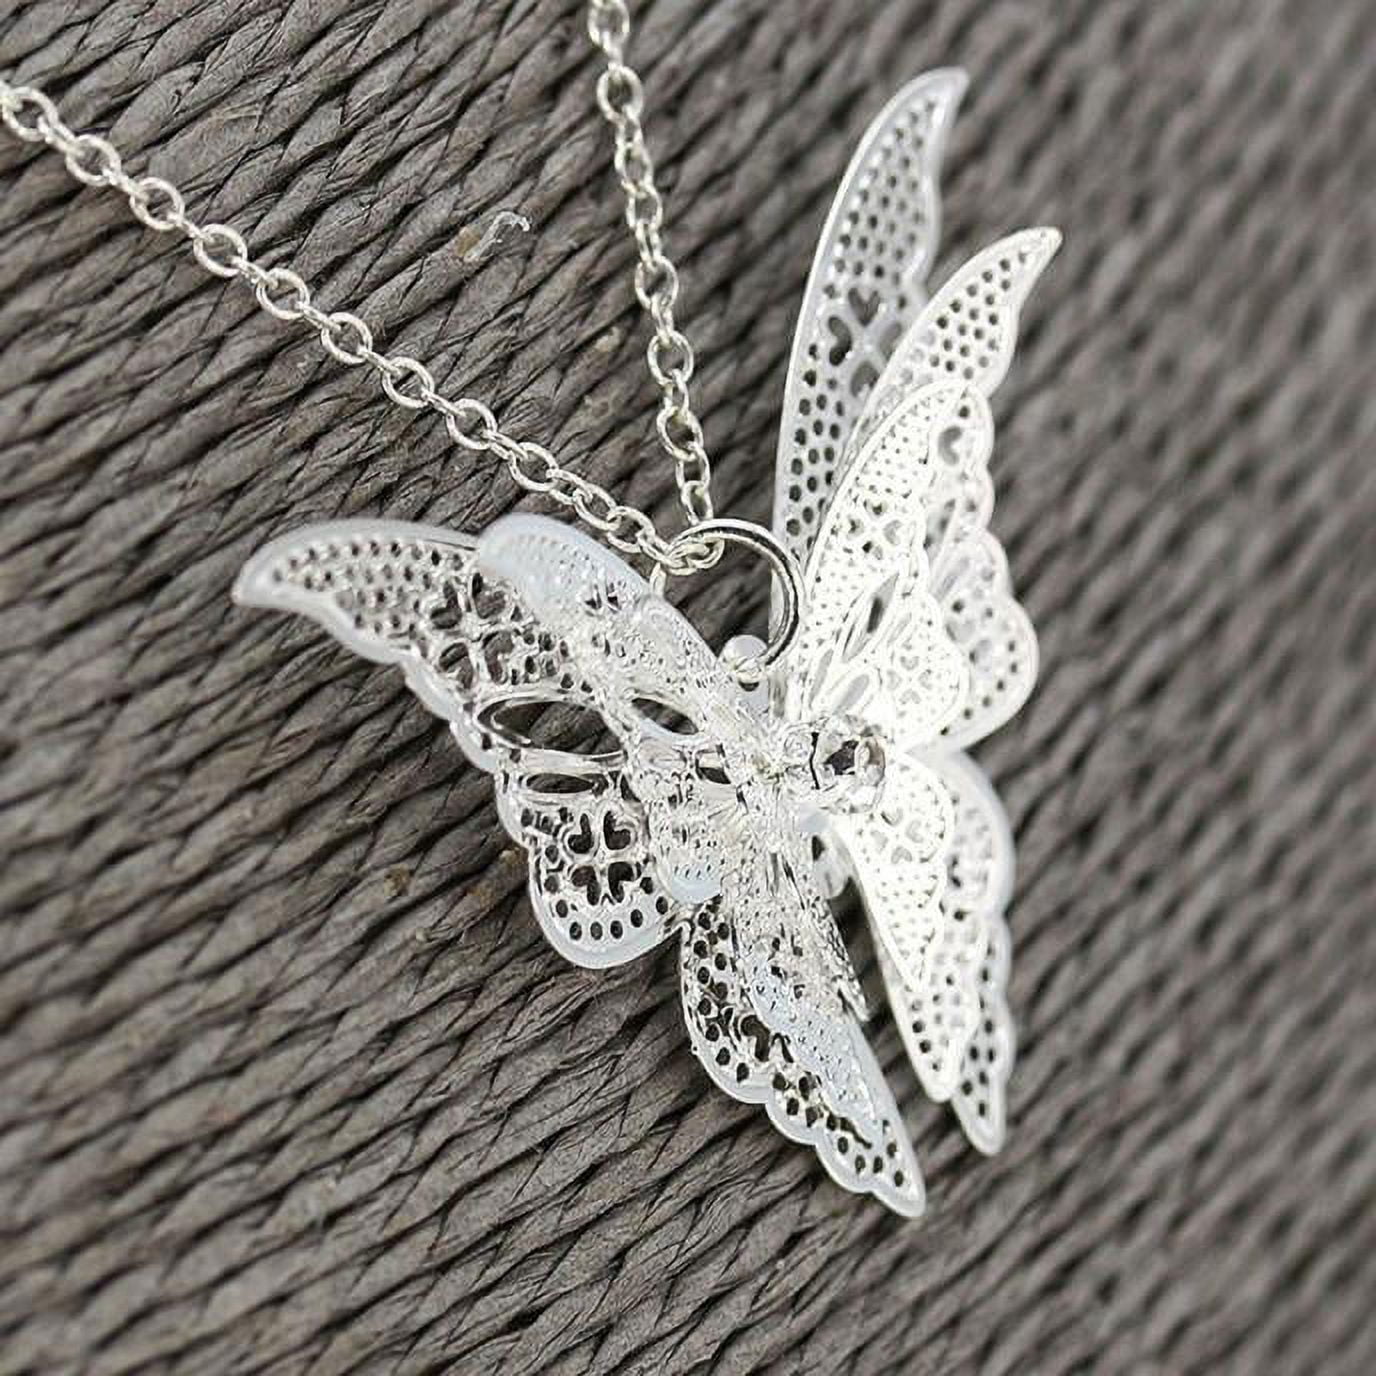 Pompotops Butterfly Pendant Necklaces Personalized Alloy Necklace Clothing Accessories Birthday Anniversary Jewelry Gift for Women Girls, Women's